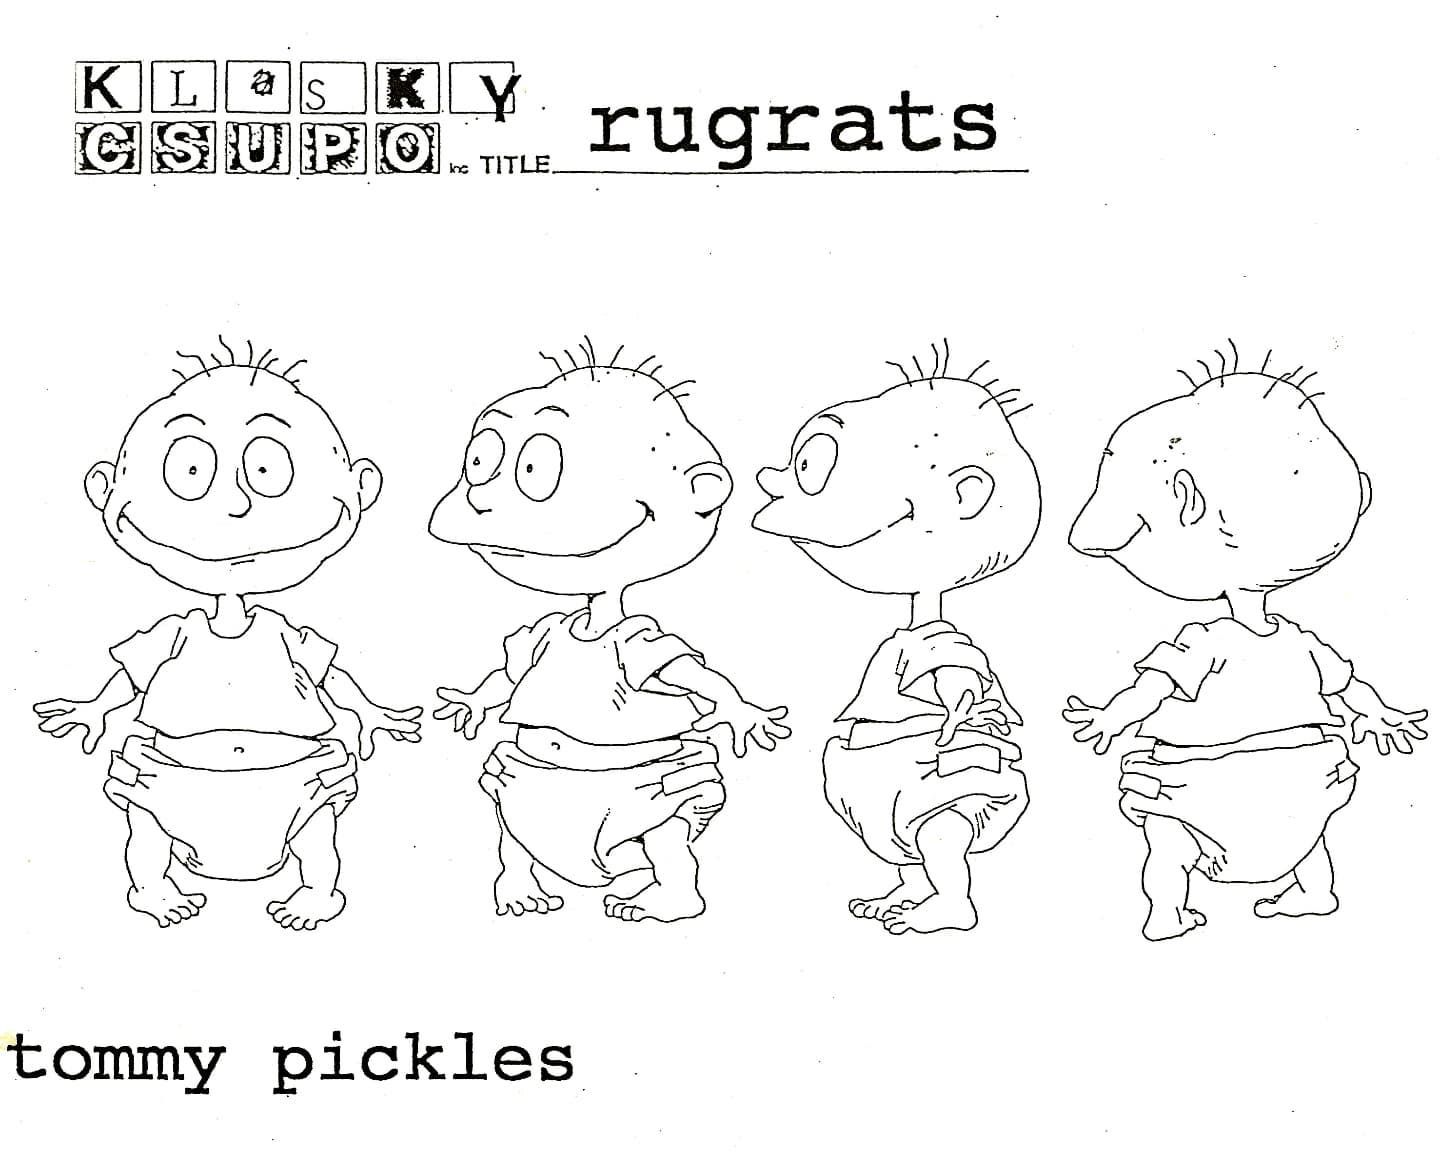 peter_k_chung_rugrats_tommy_picckles